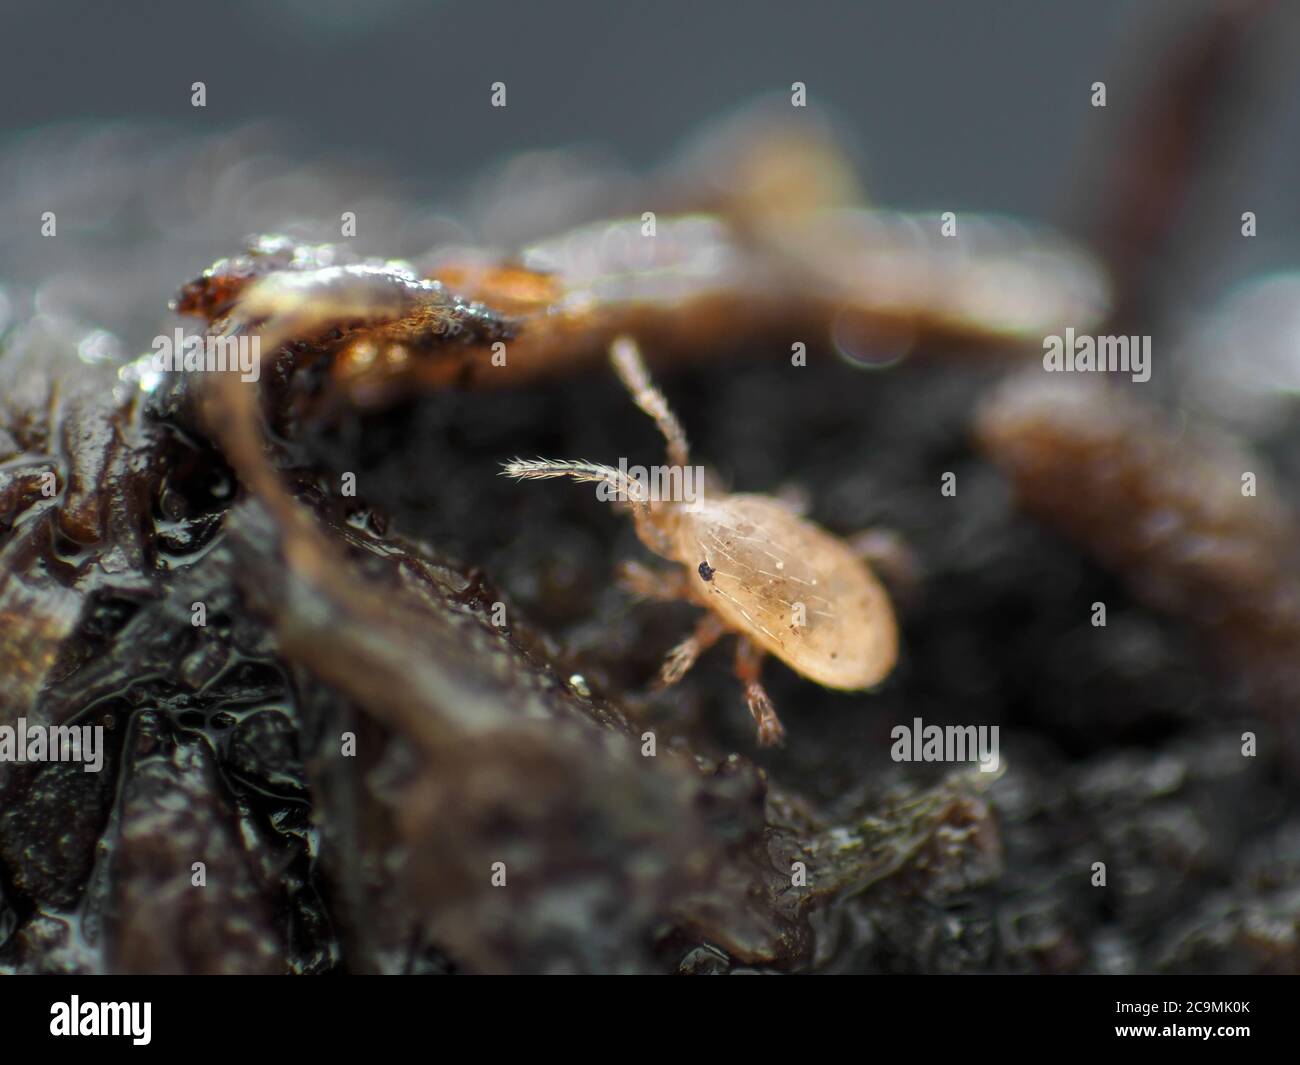 Tiny soil mite (live and active) under the microscope Stock Photo